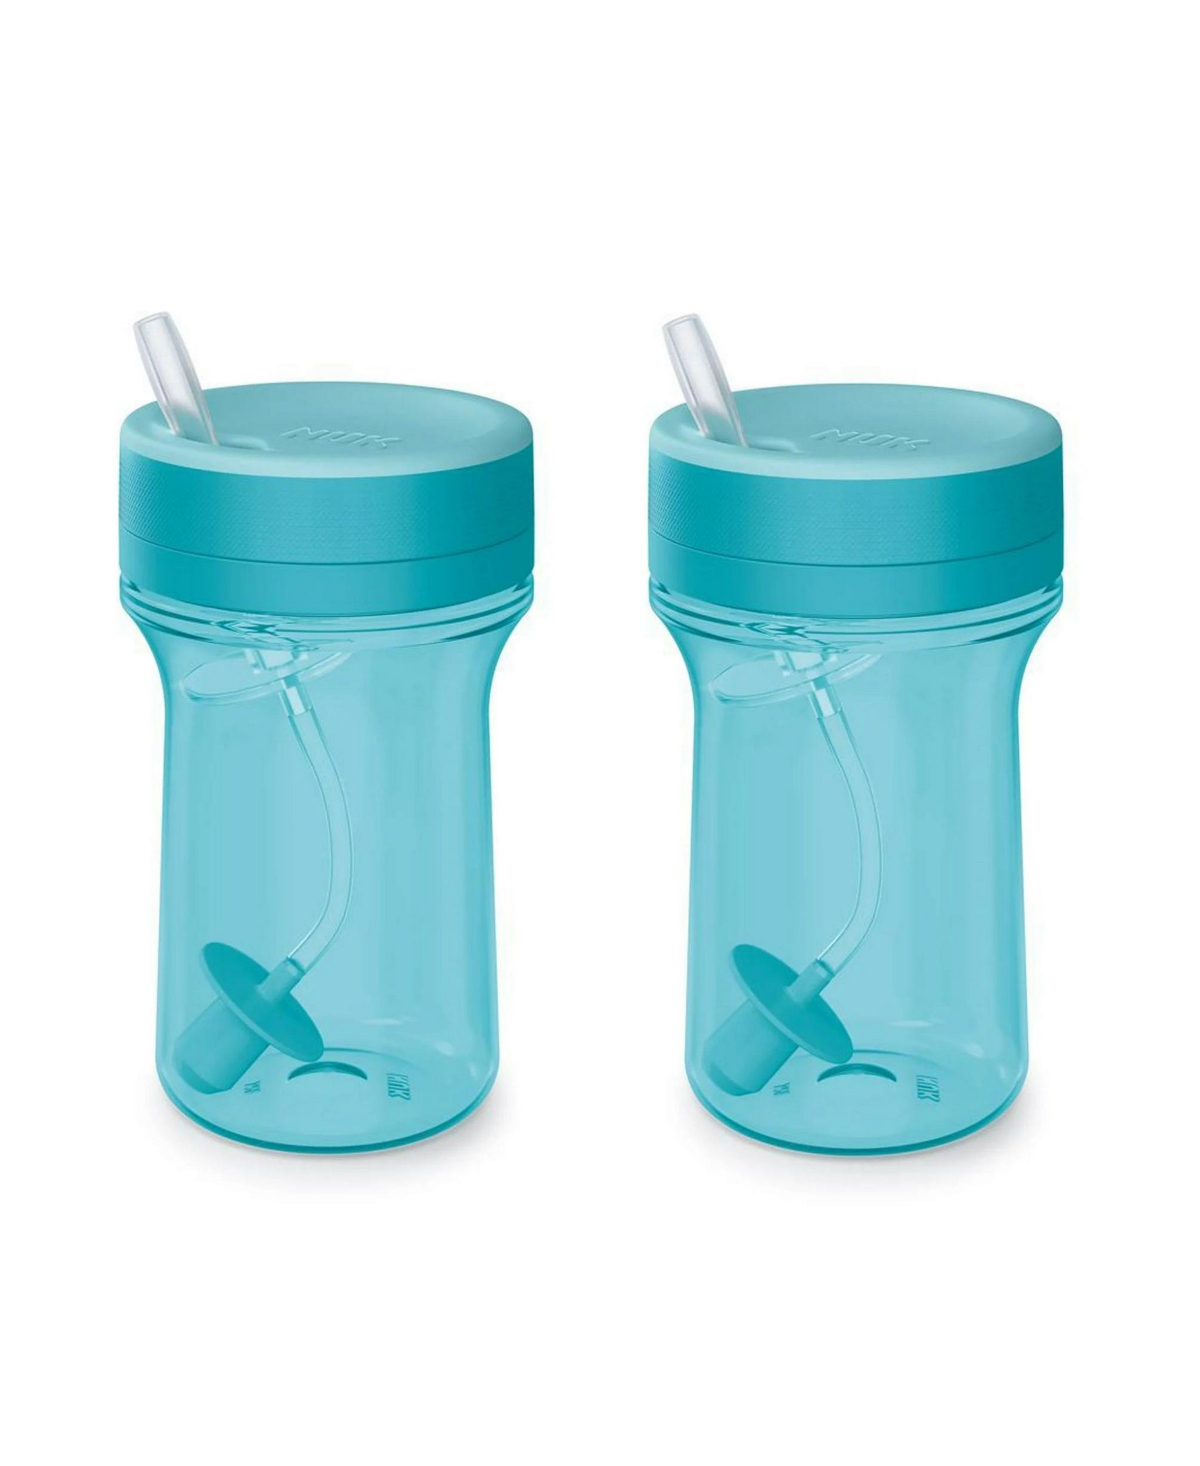 Nuk Everlast Leakproof Weighted Straw Cup, 10 Oz, 2 Pack, Teal In Turquoise/aqua